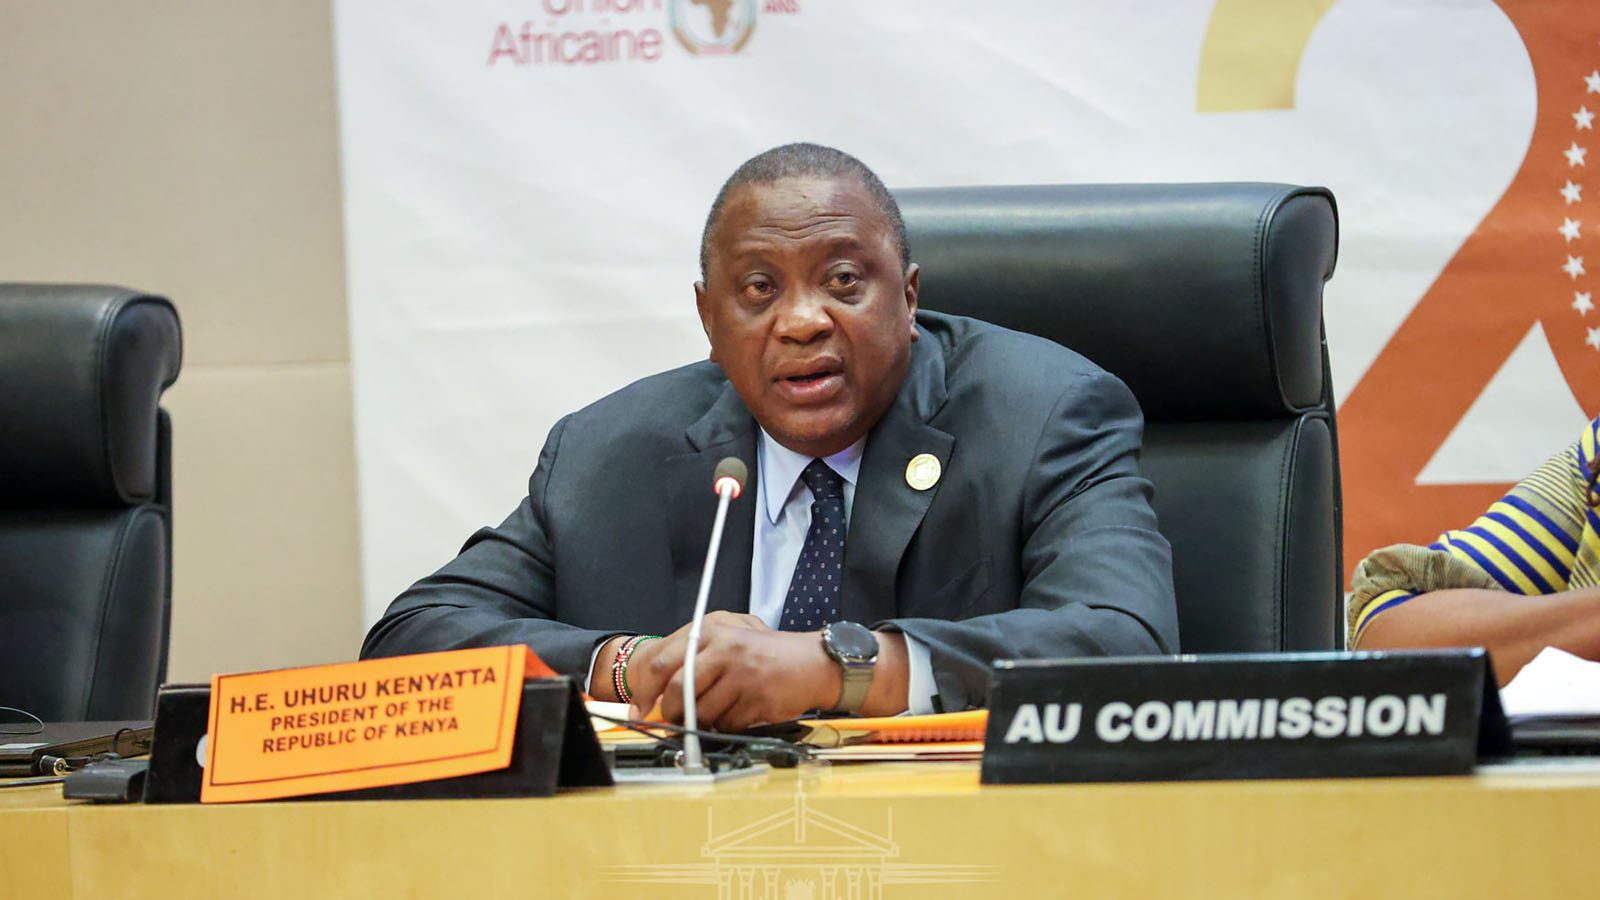 Kenyan President Uhuru commends African countries progress in fight against Malaria. HealthCare Africa Magazine